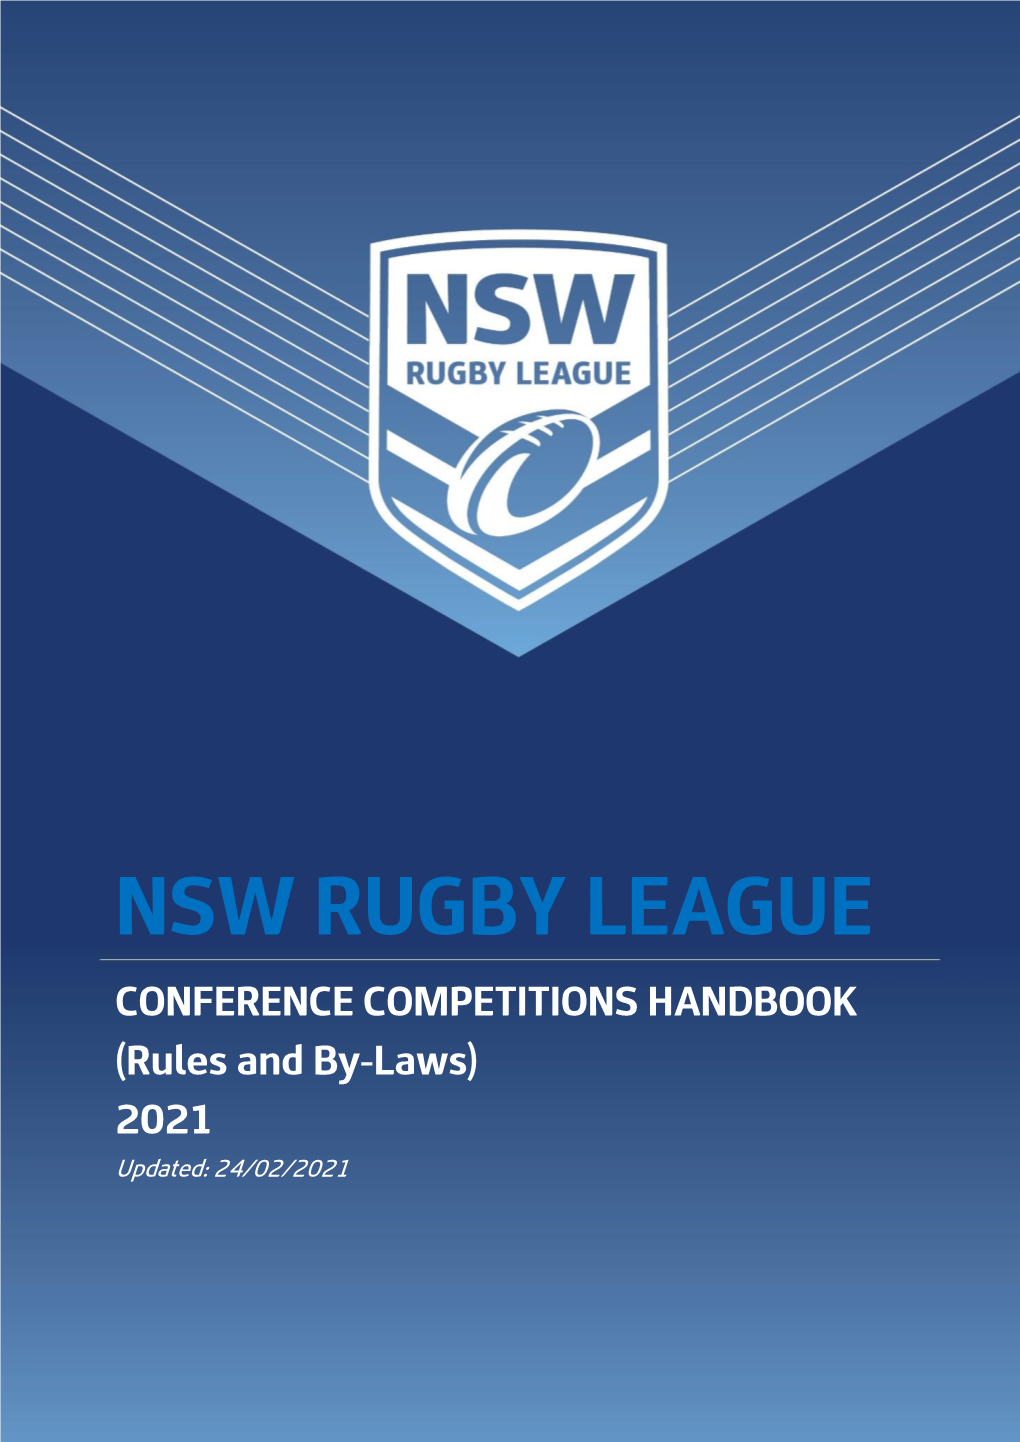 NSW RUGBY LEAGUE CONFERENCE COMPETITIONS HANDBOOK (Rules and By-Laws) 2021 Updated: 24/02/2021 NSWRL CONFERENCE COMPETITIONS HANDBOOK 2021